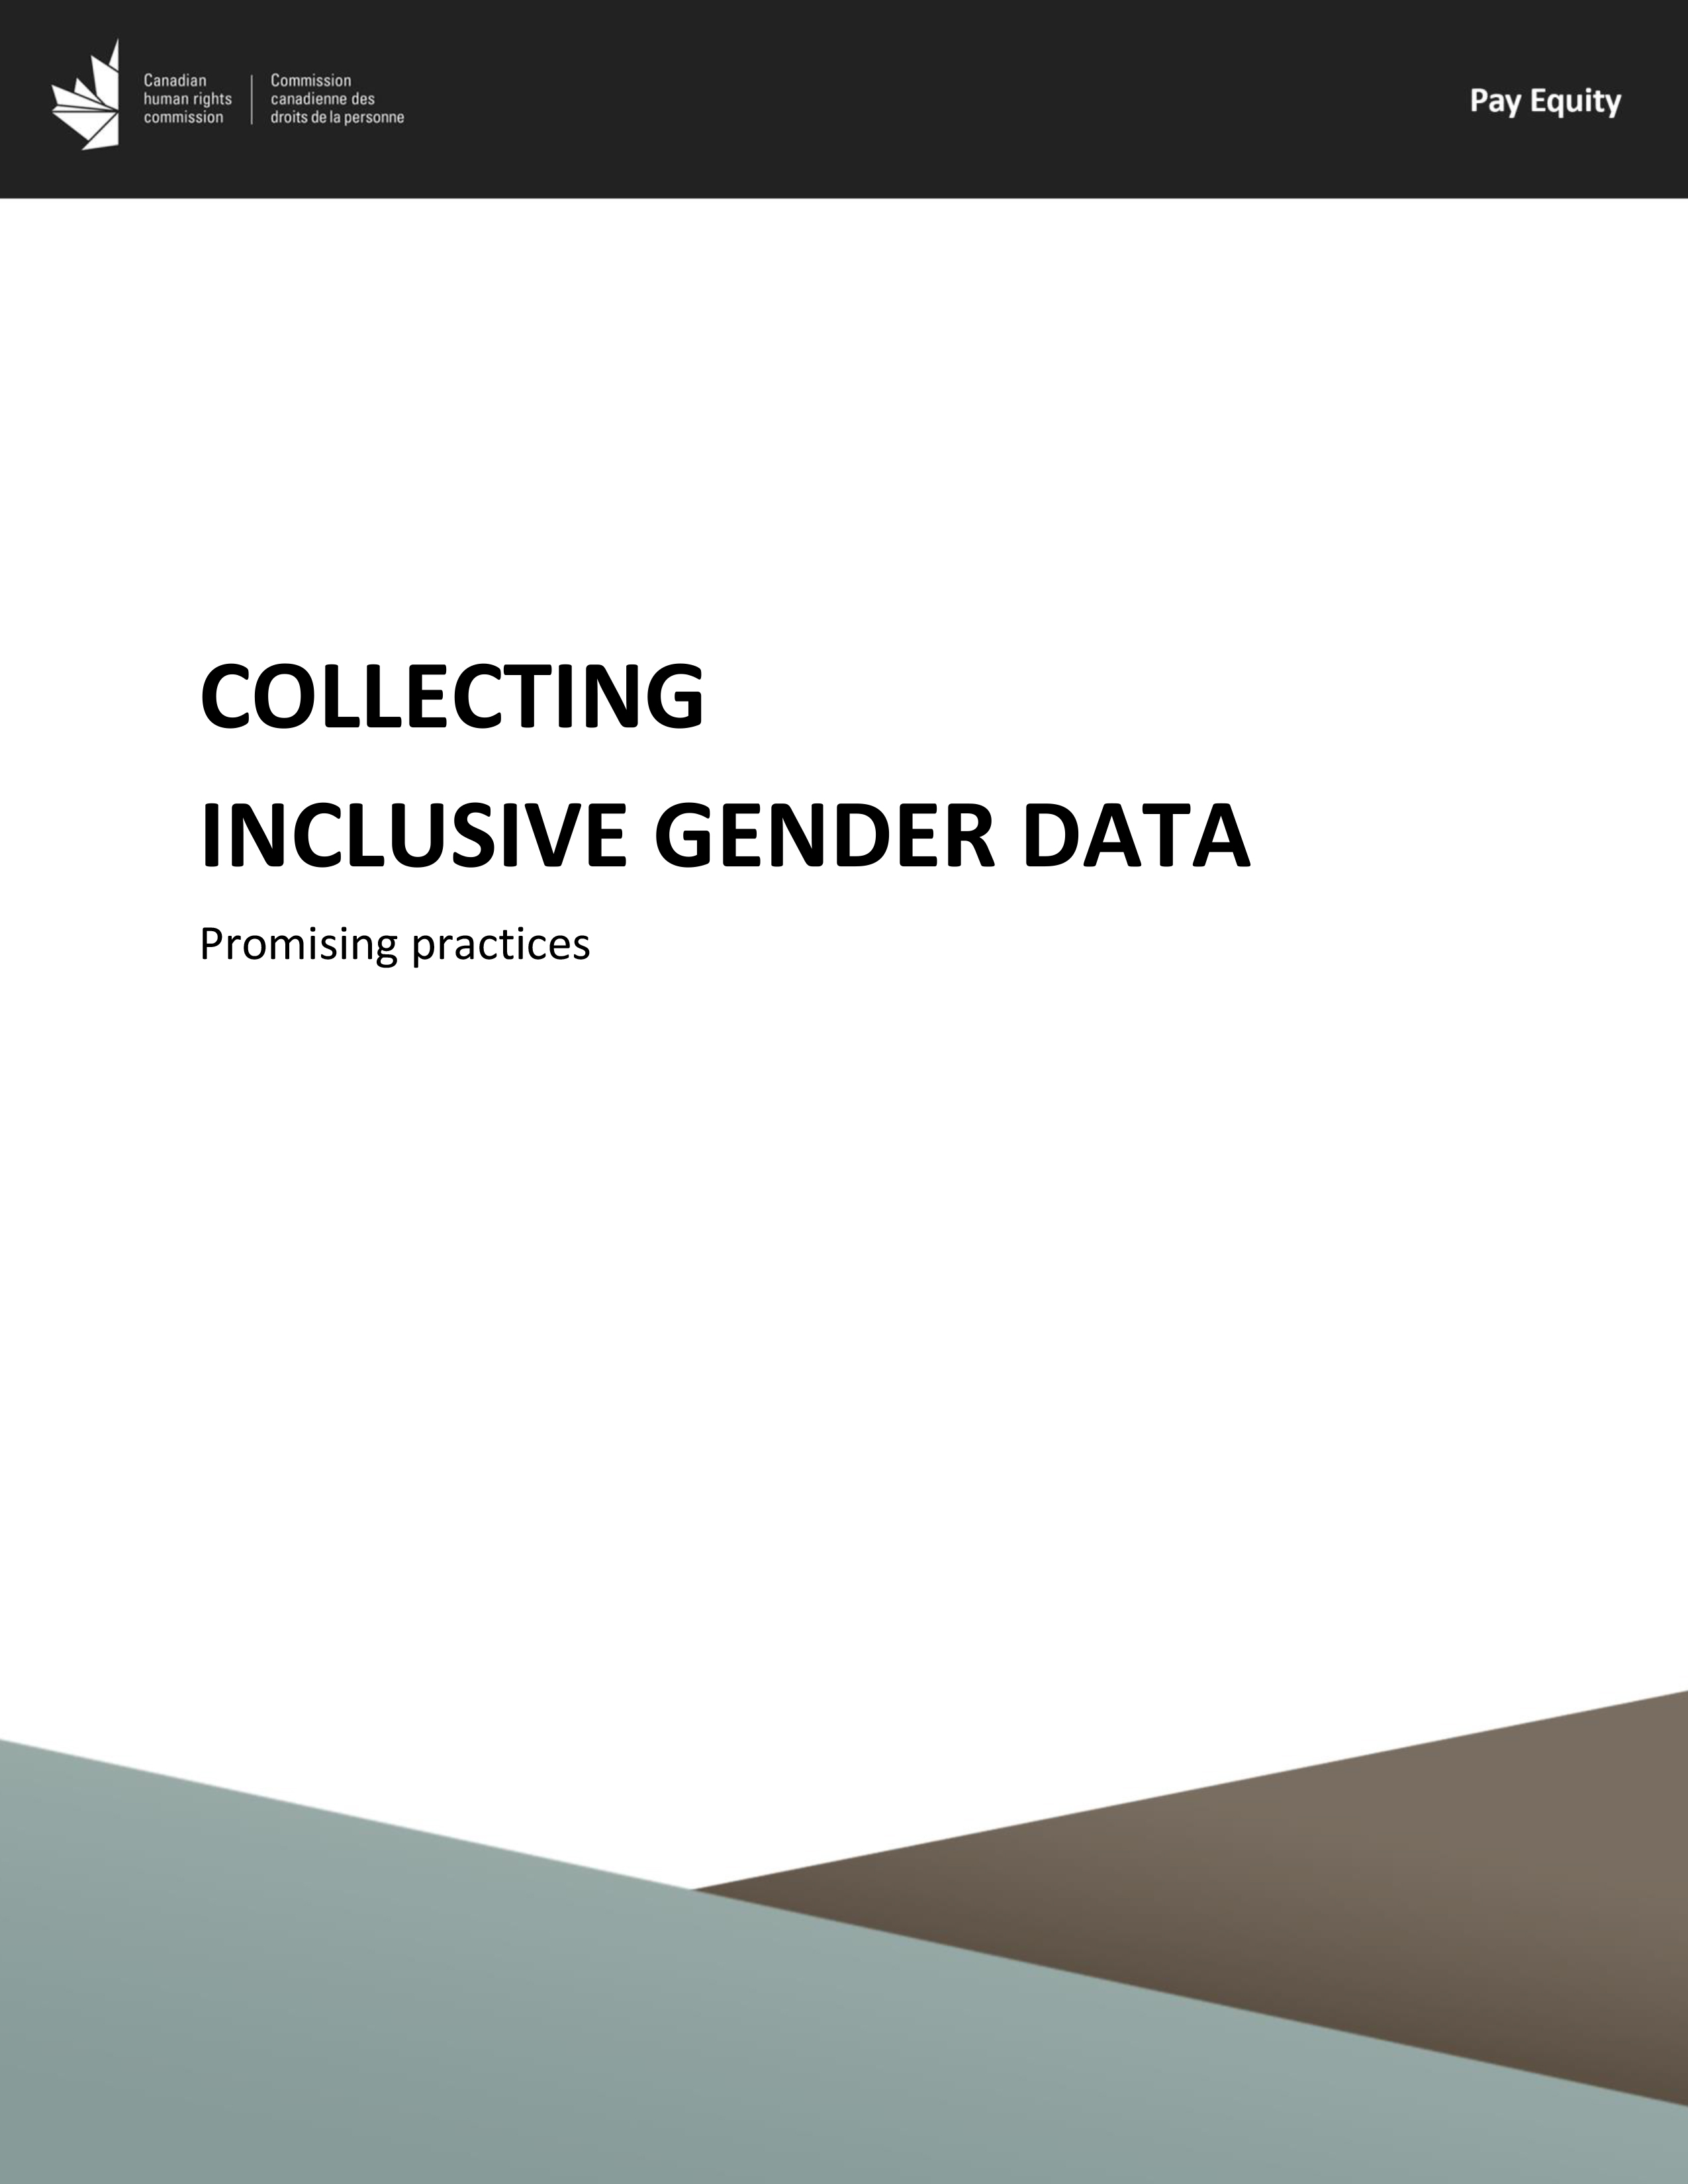 Promising practices - Collecting inclusive gender data